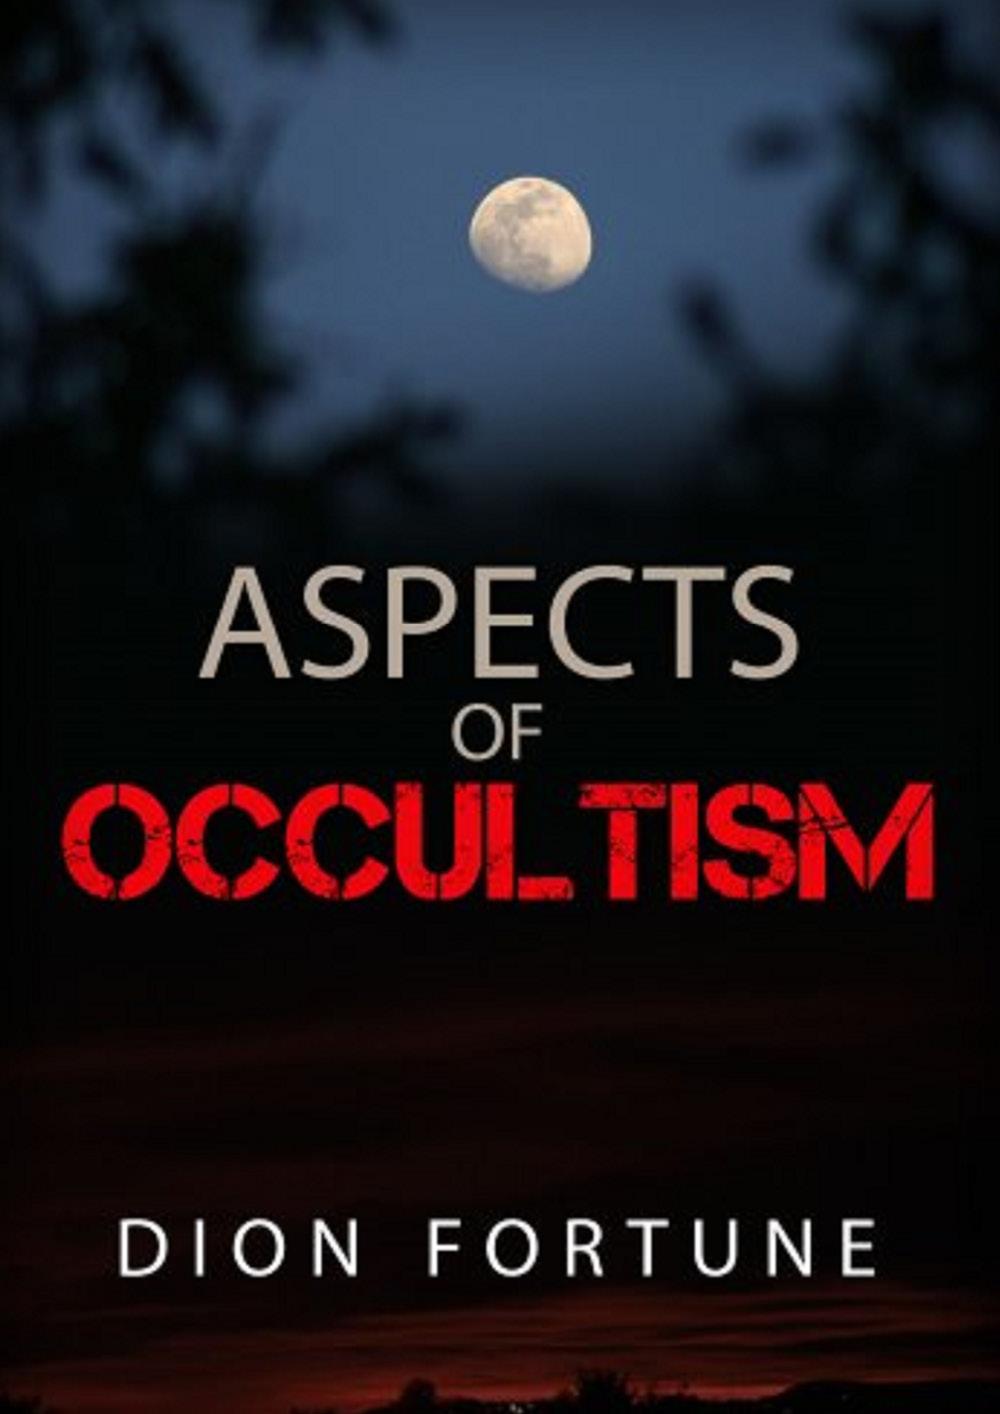 Aspects of occultism